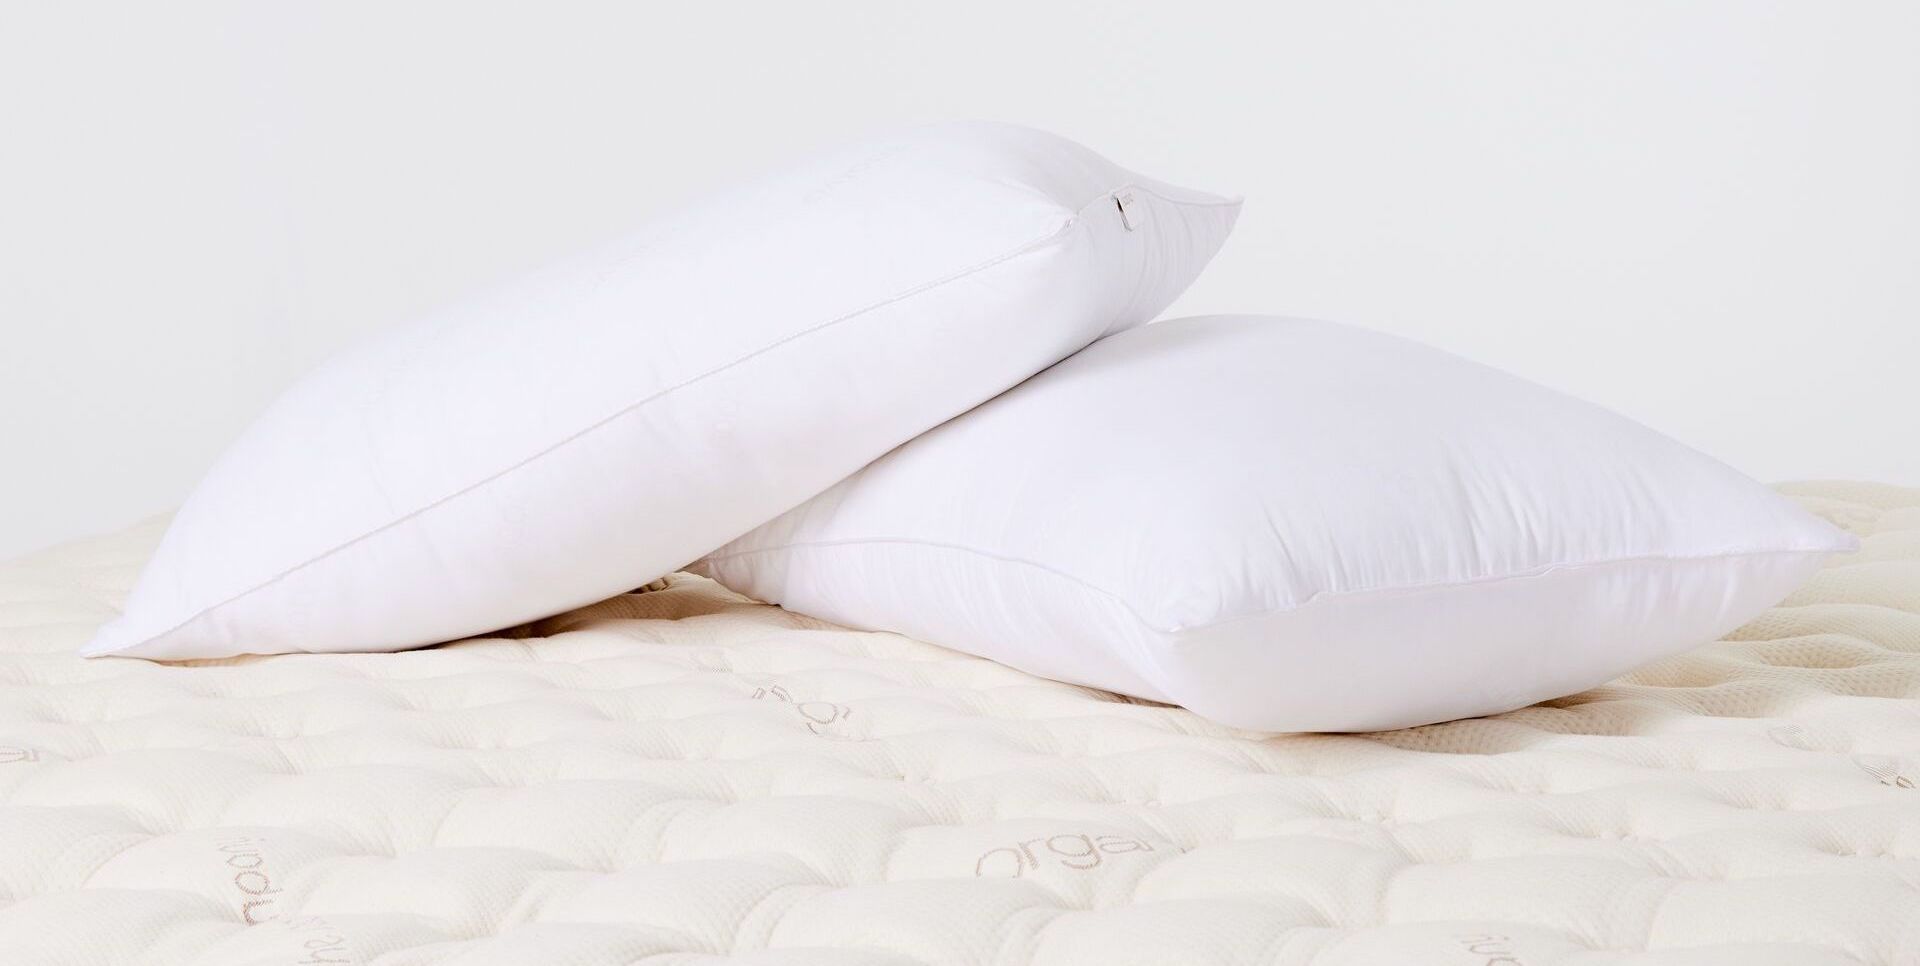 Different Types of Pillow Stuffing: Which Is Best For You?